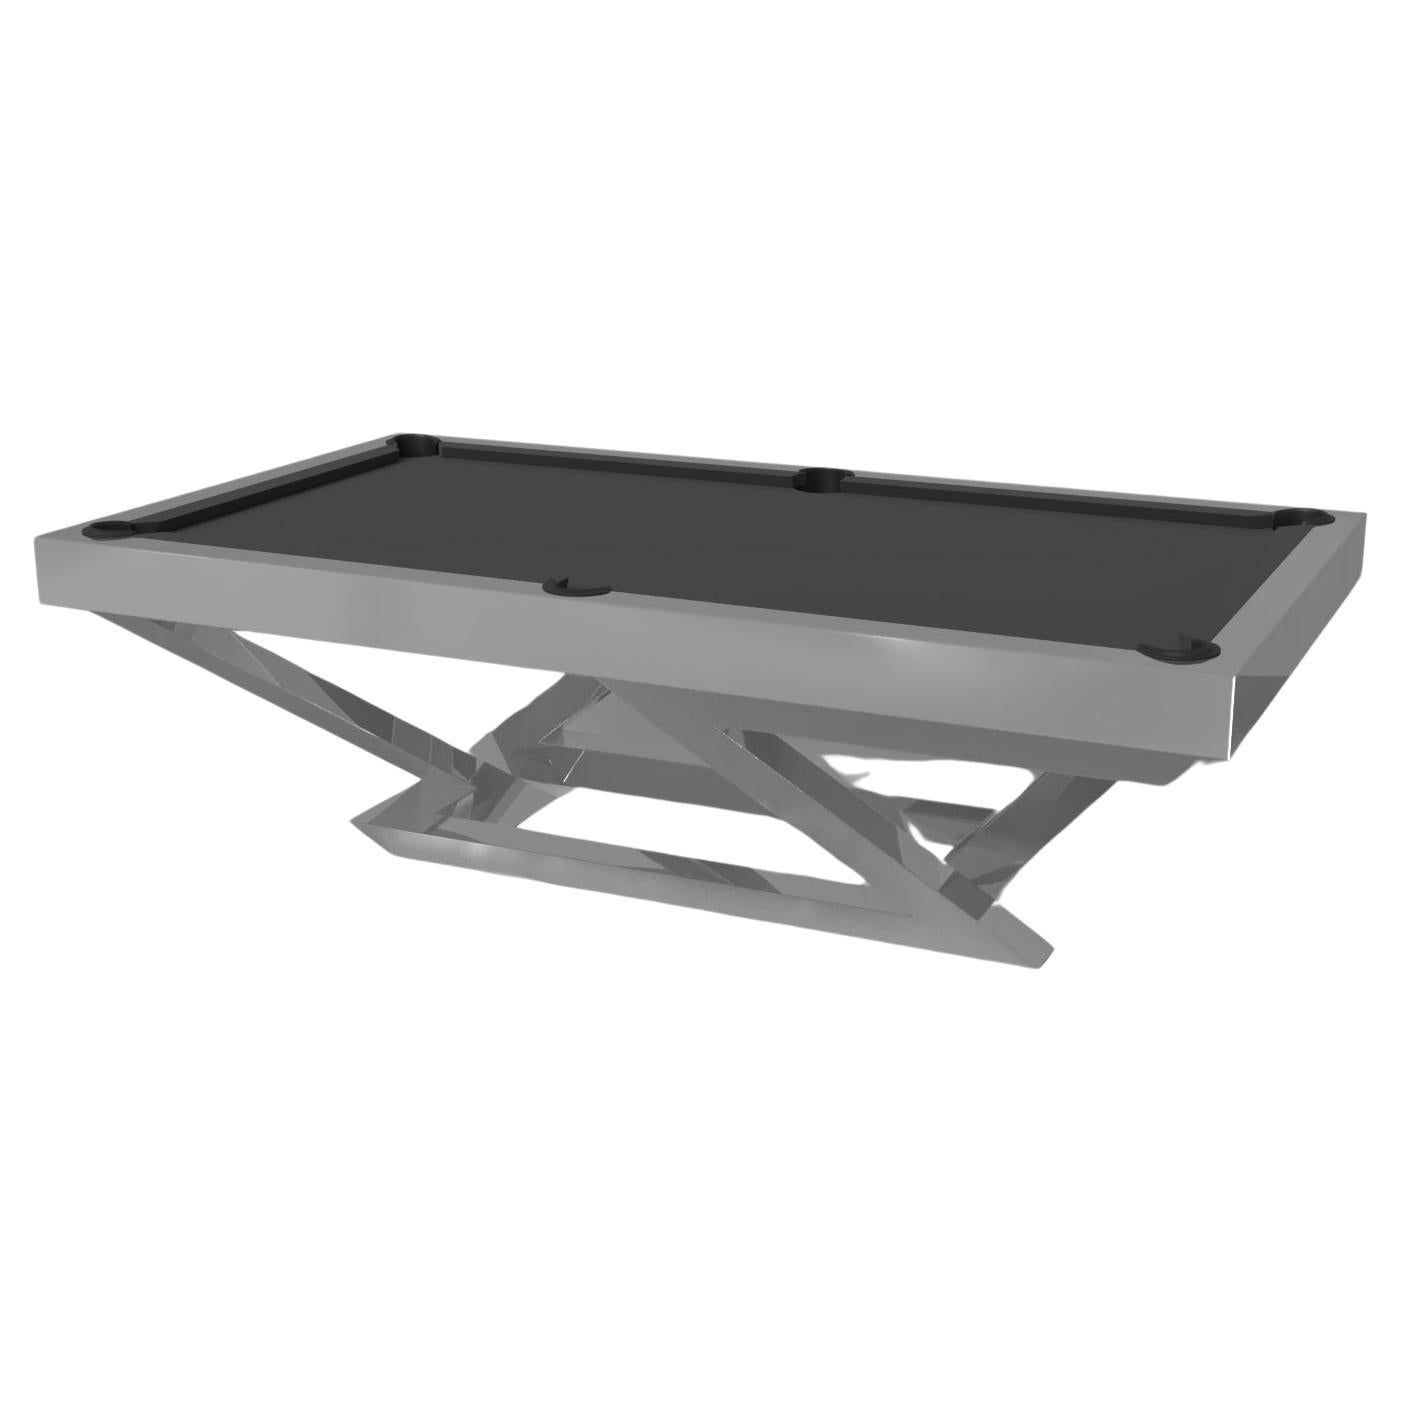 Elevate Customs Trinity Pool Table / Solid Stainless Steel in 8.5' - Made in USA